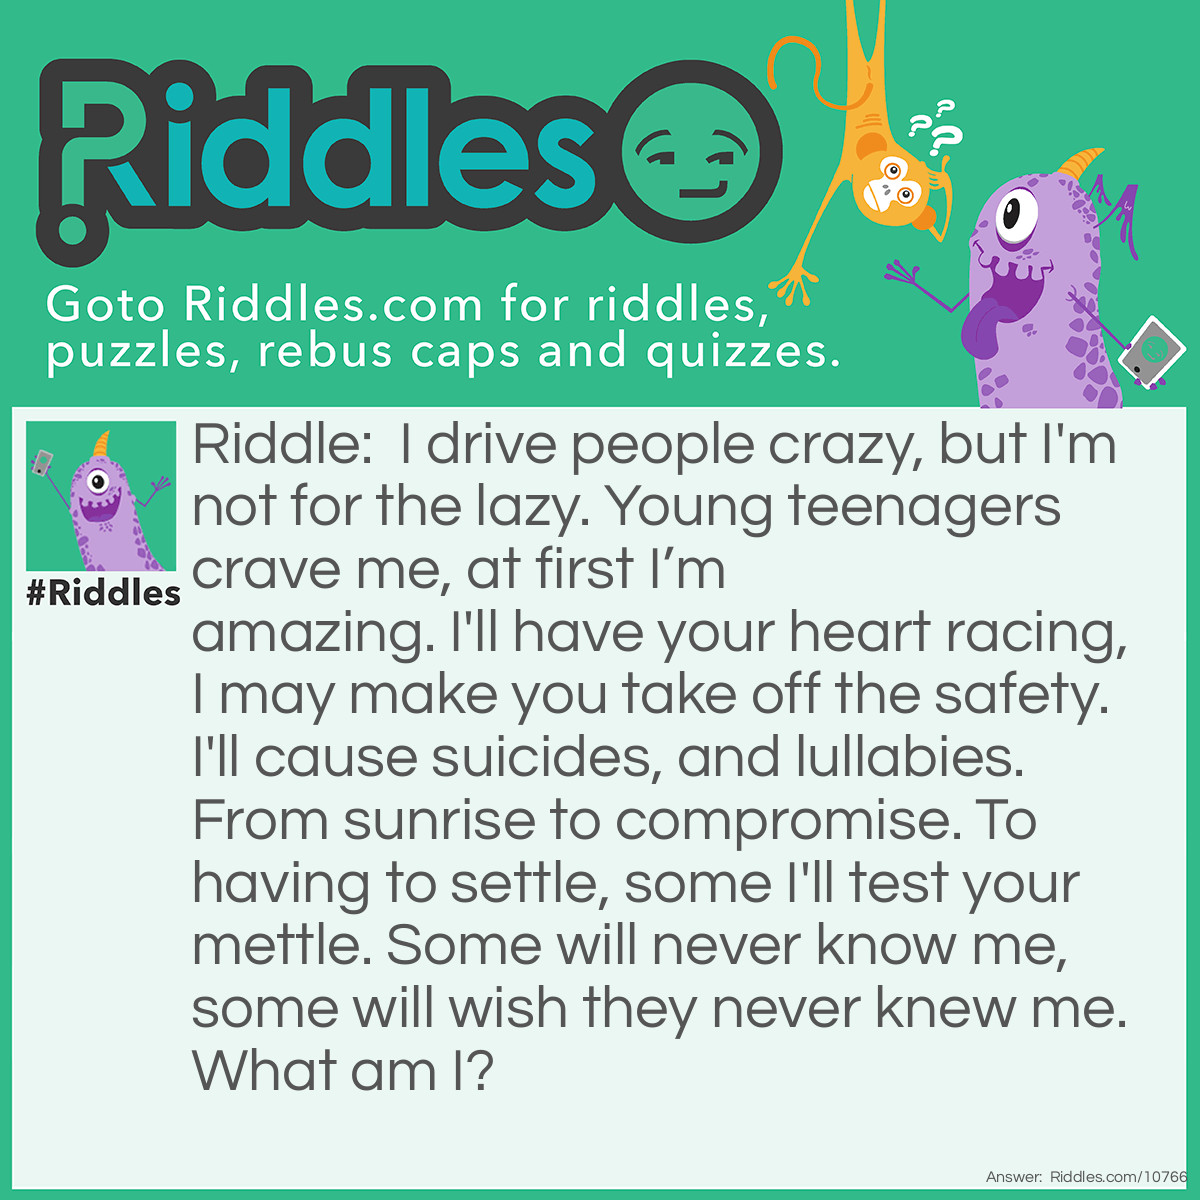 Riddle: I drive people crazy, but I'm not for the lazy. Young teenagers crave me, at first I’m amazing. I'll have your heart racing, I may make you take off the safety. I'll cause suicides, and lullabies. From sunrise to compromise. To having to settle, some I'll test your mettle. Some will never know me, some will wish they never knew me. What am I? Answer: Love.